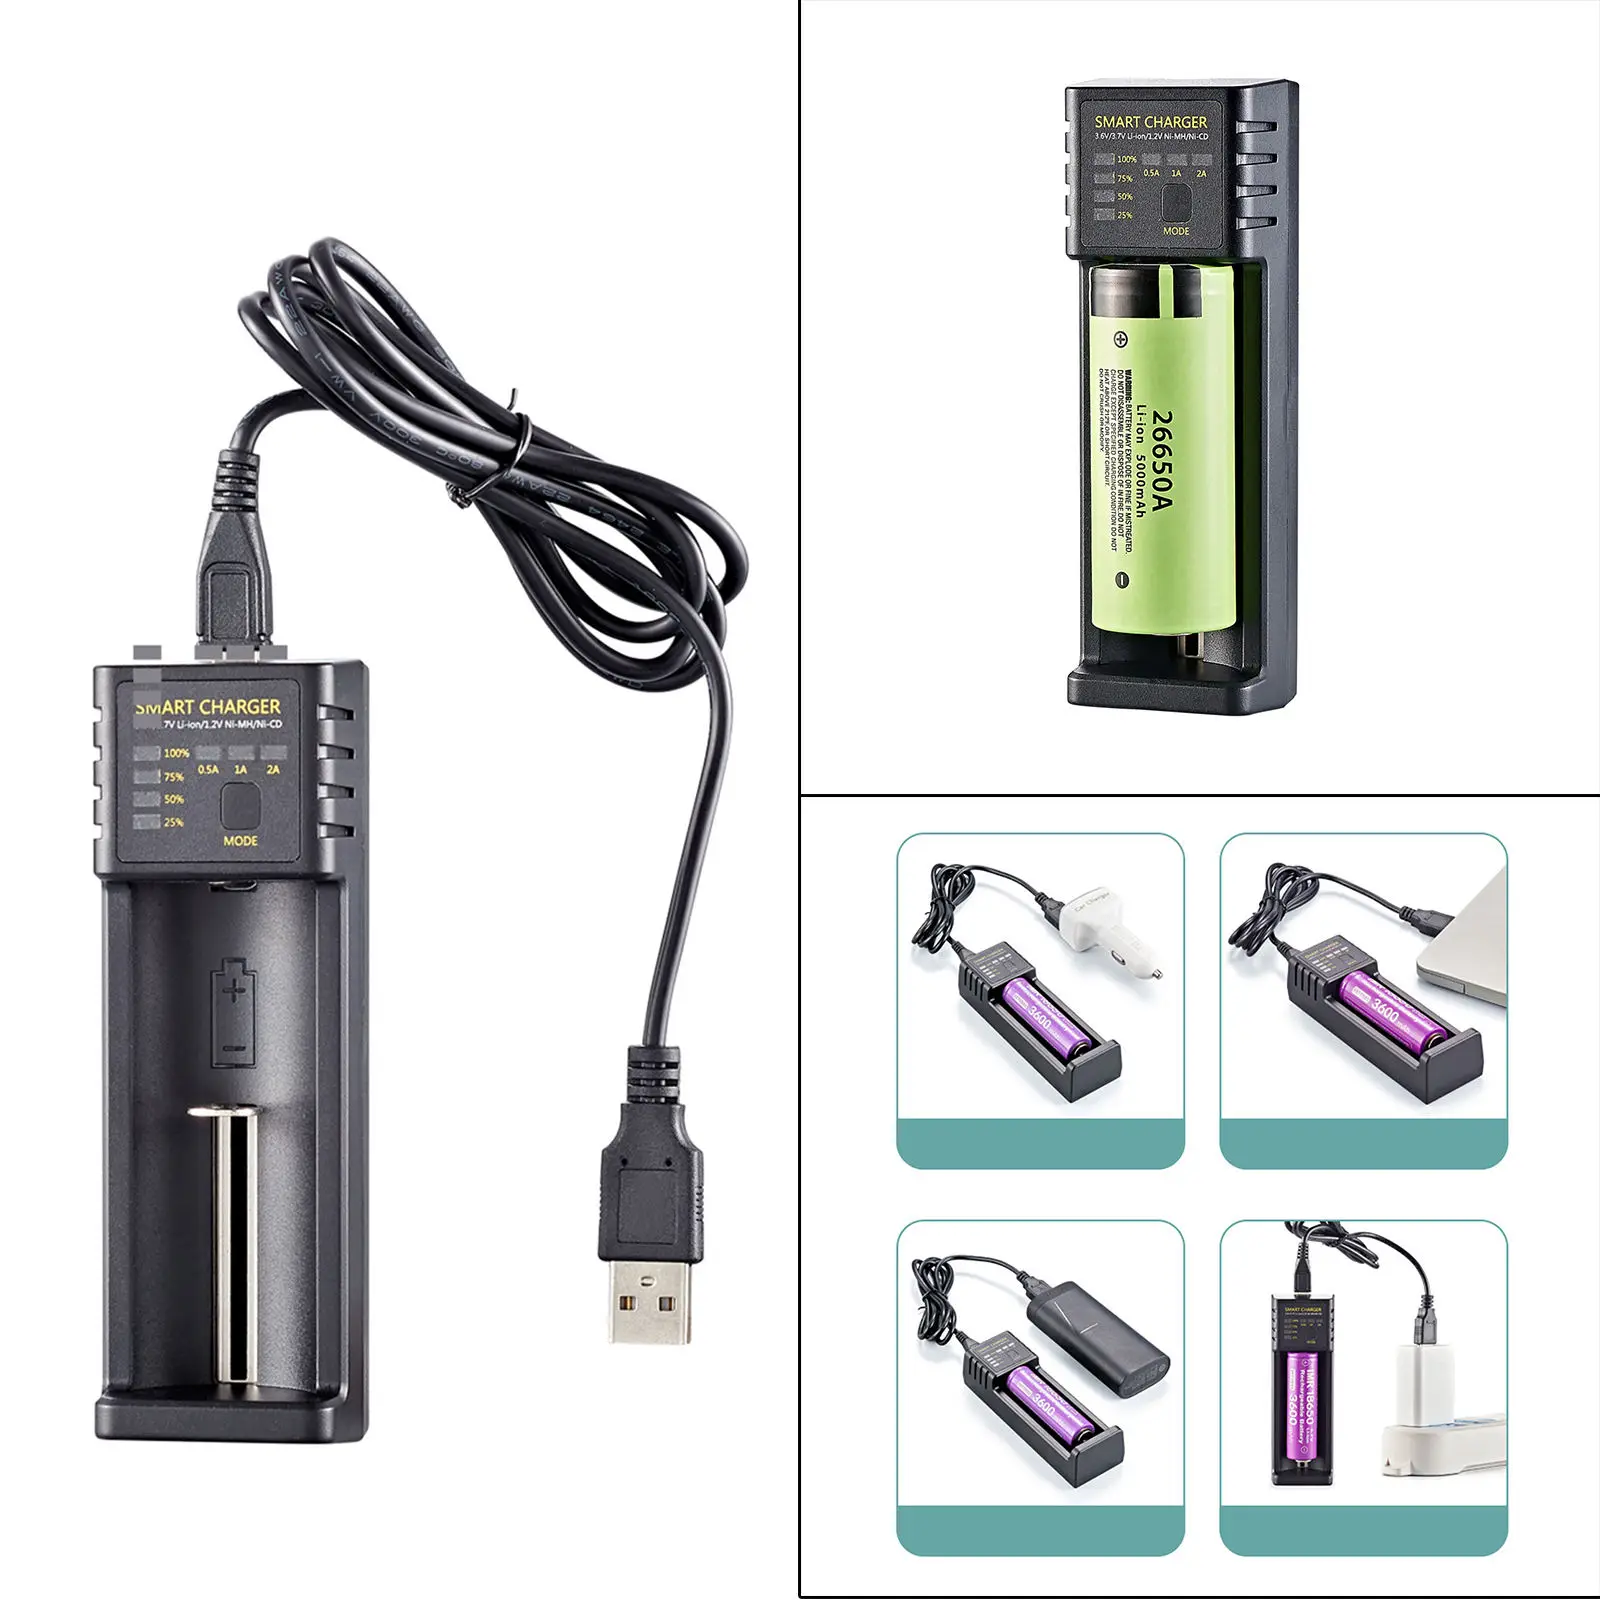 Universal 18650 Battery Charger 3.6V/3.7V LI-Ion Battery with USB Port 16340/17500/17670 One Slot 10400/14500/14650 Lithium